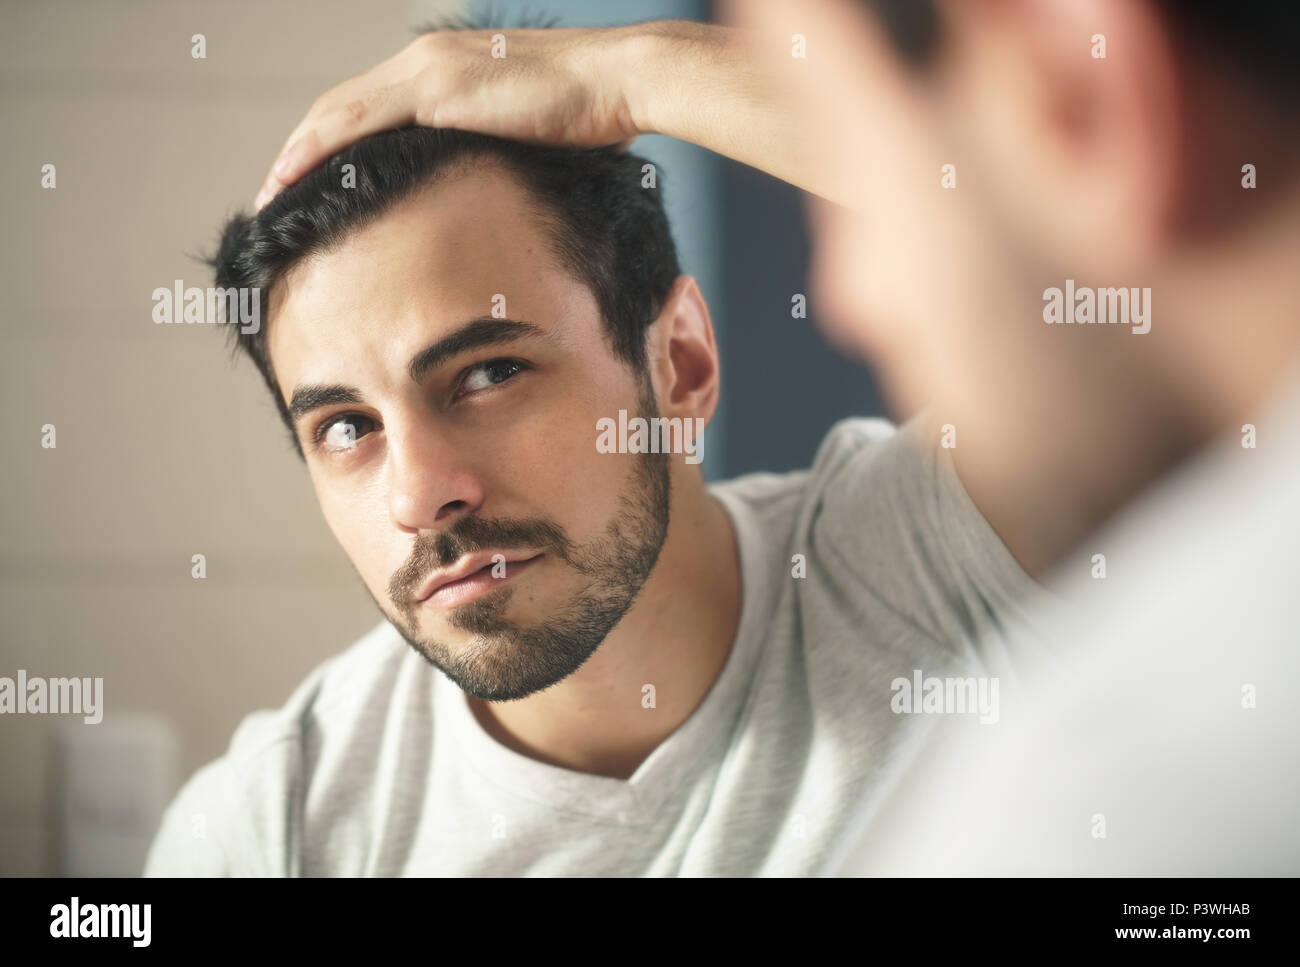 Man Worried For Alopecia Checking Hair For Loss Stock Photo